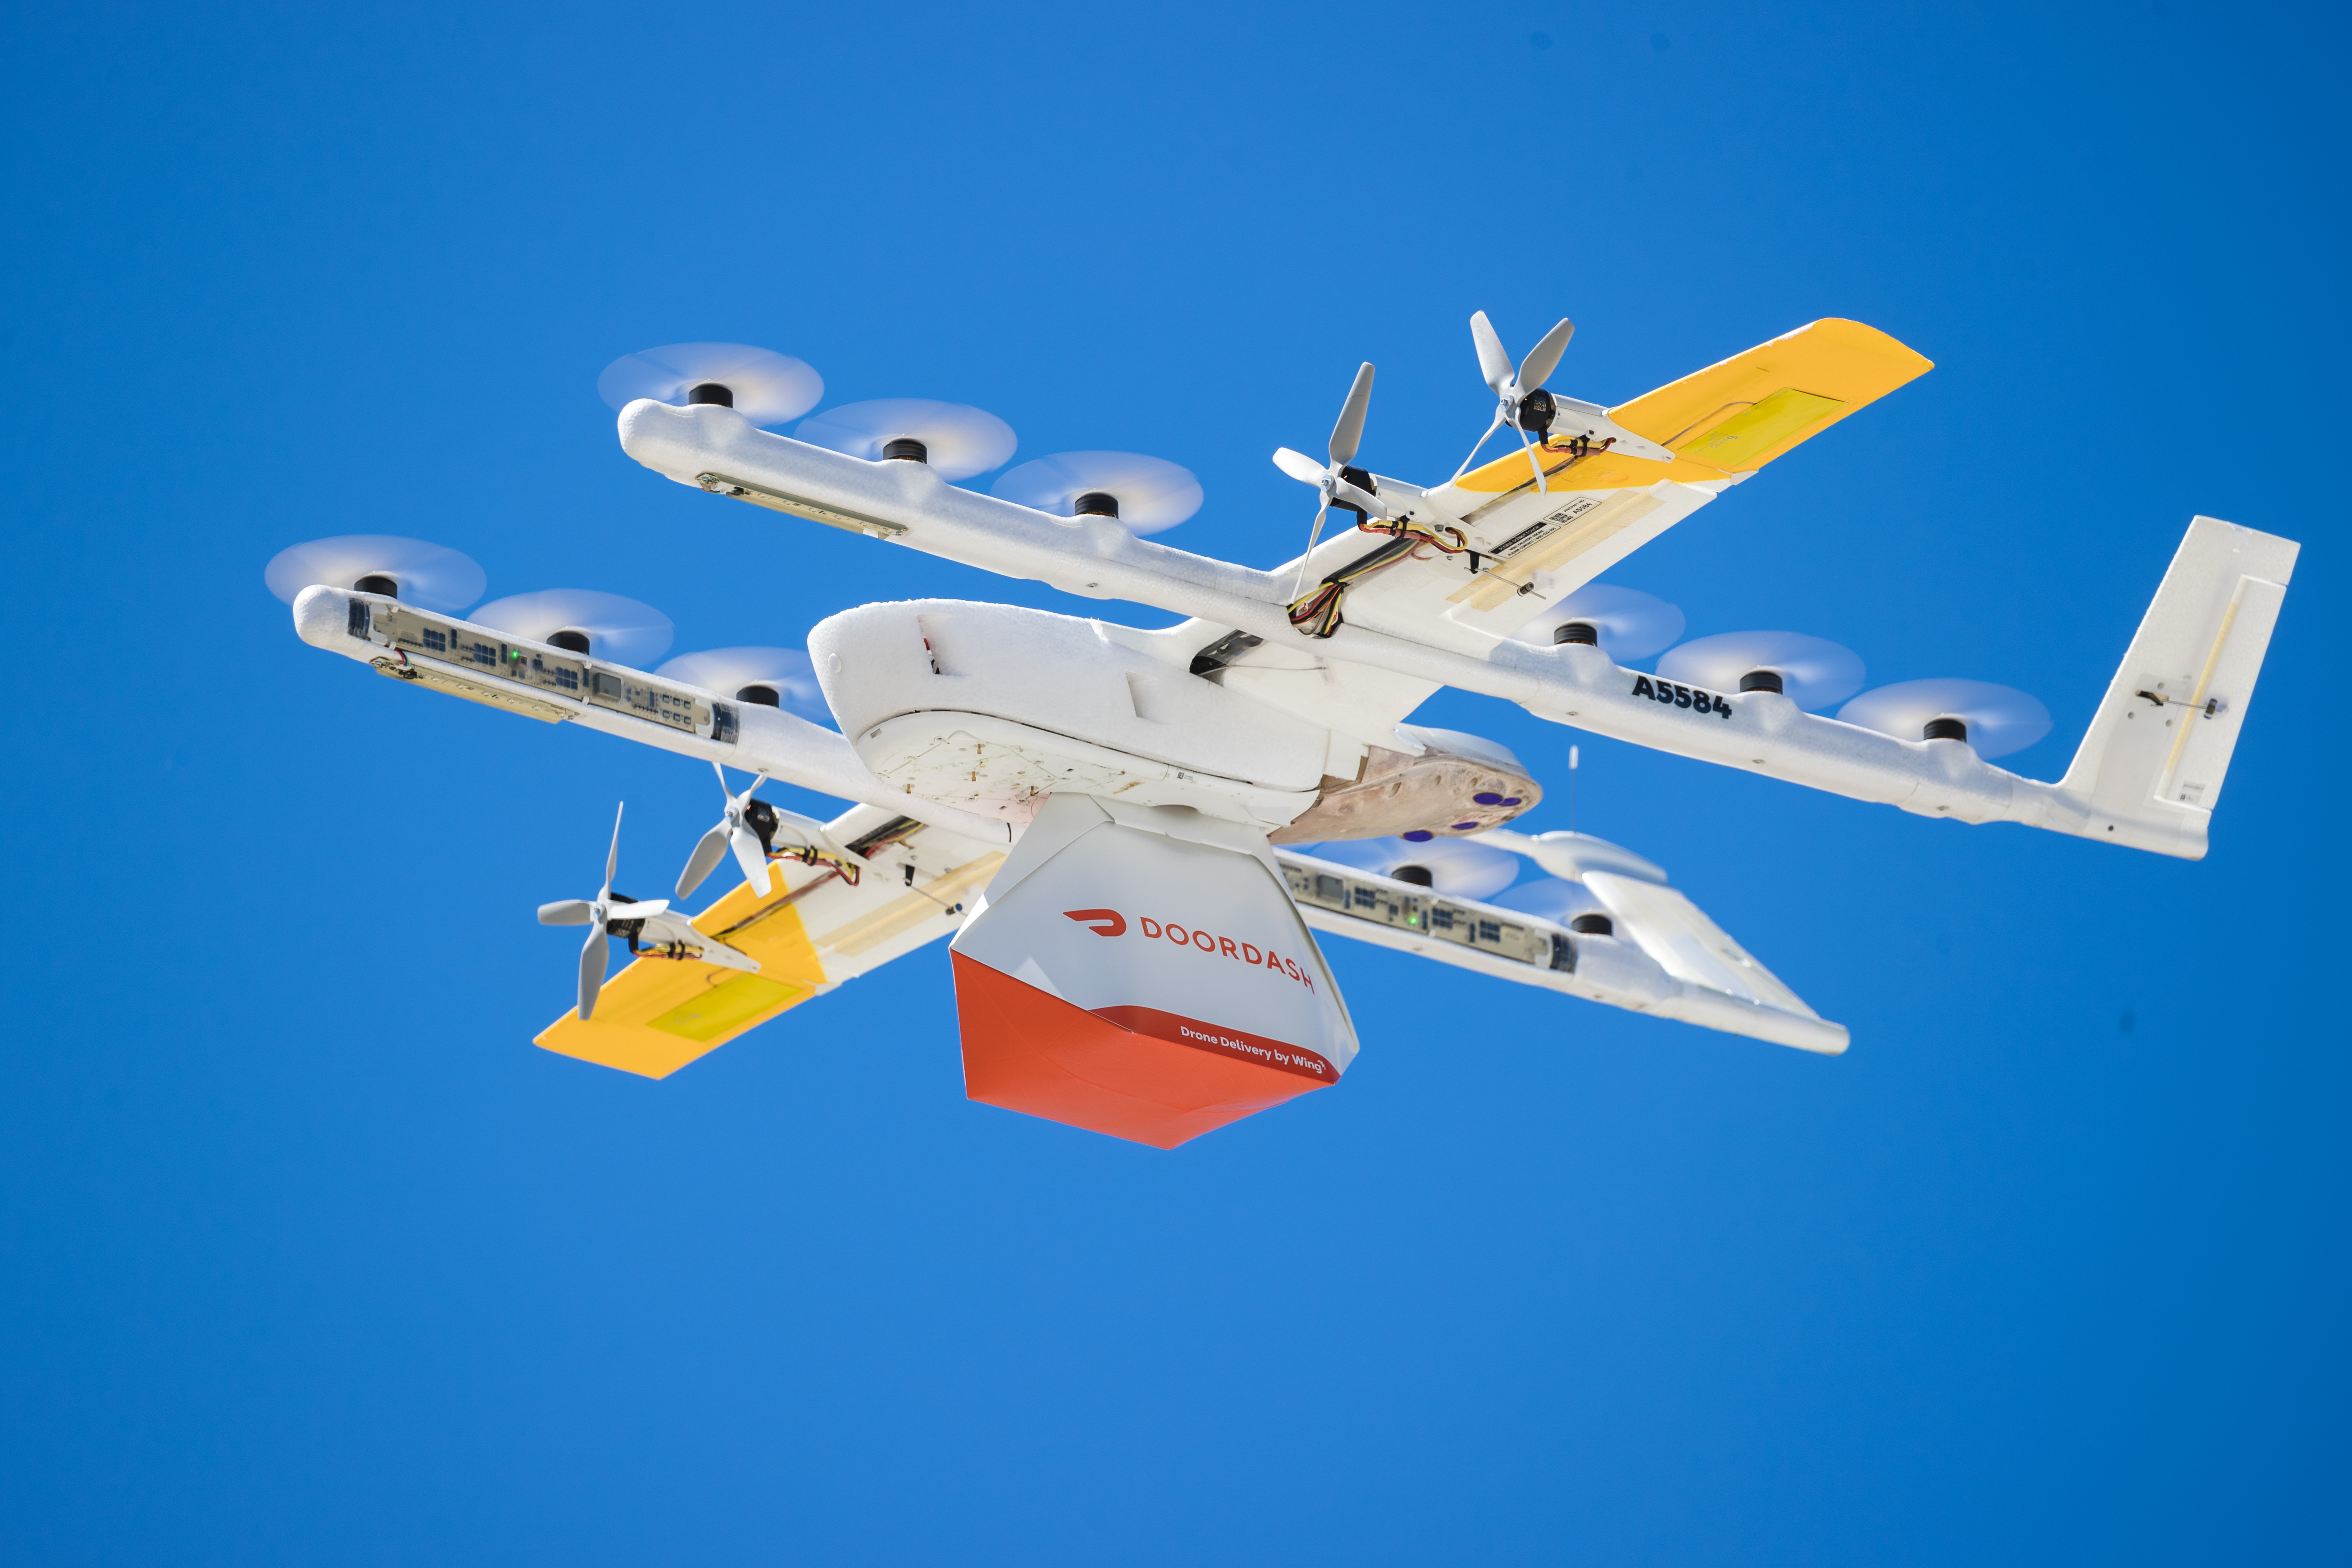 Wing returns to its US drone delivery home in DoorDash partnership